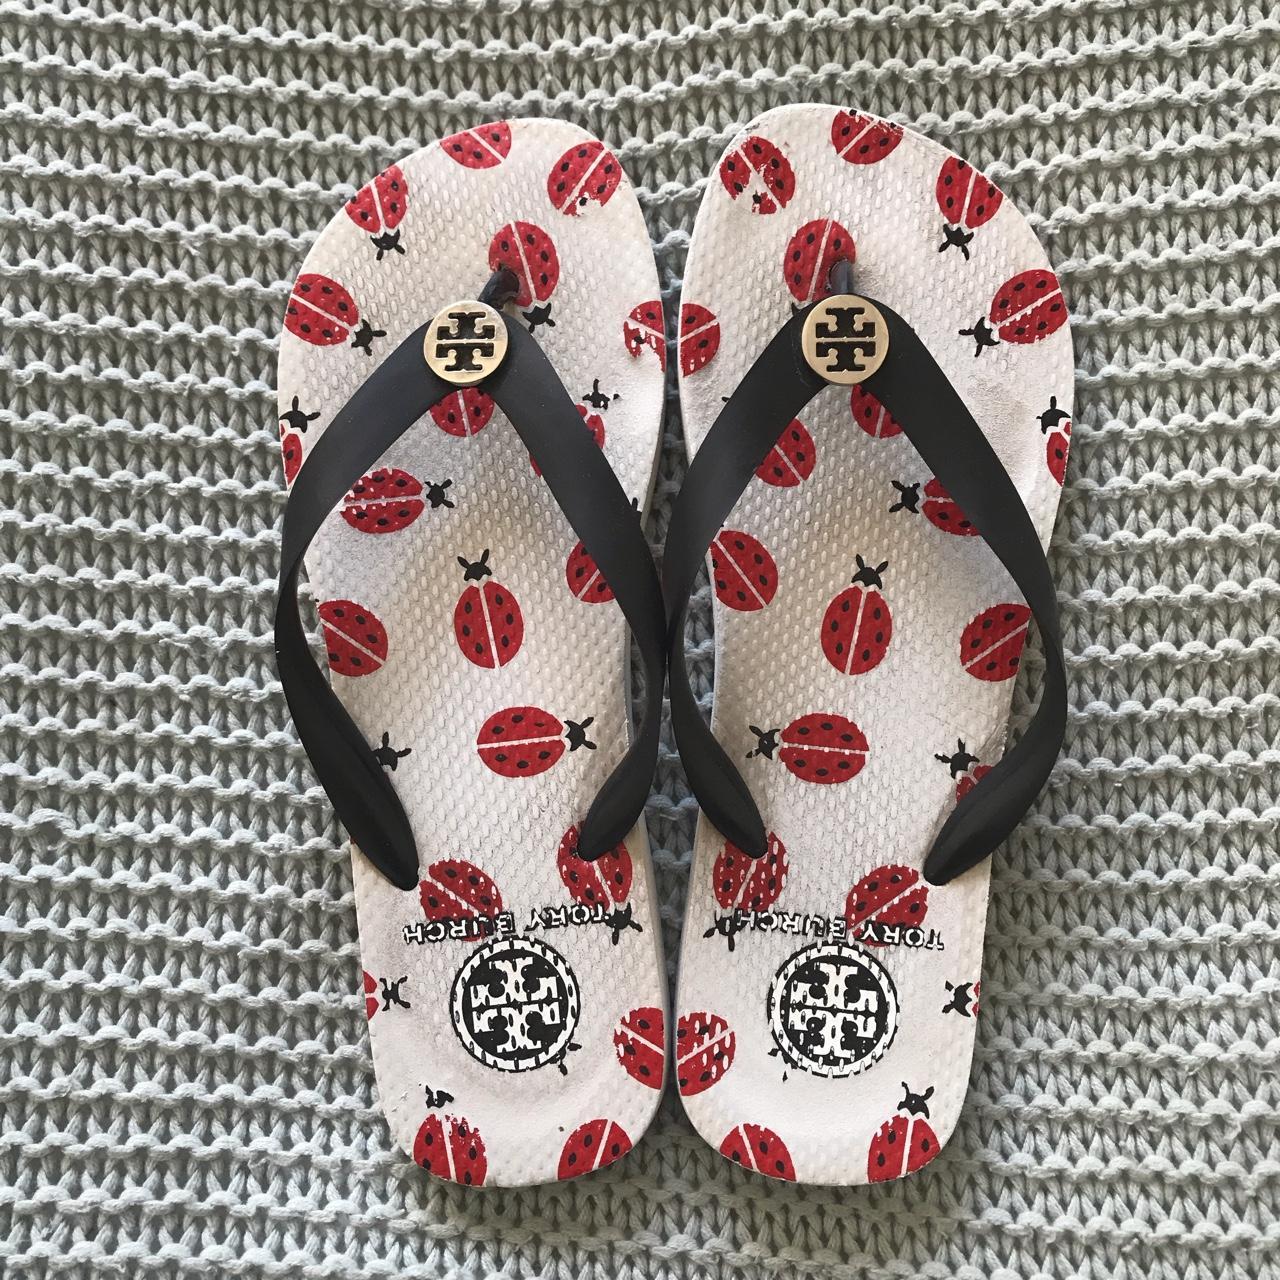 Tory Burch Women's White and Red Sandals | Depop